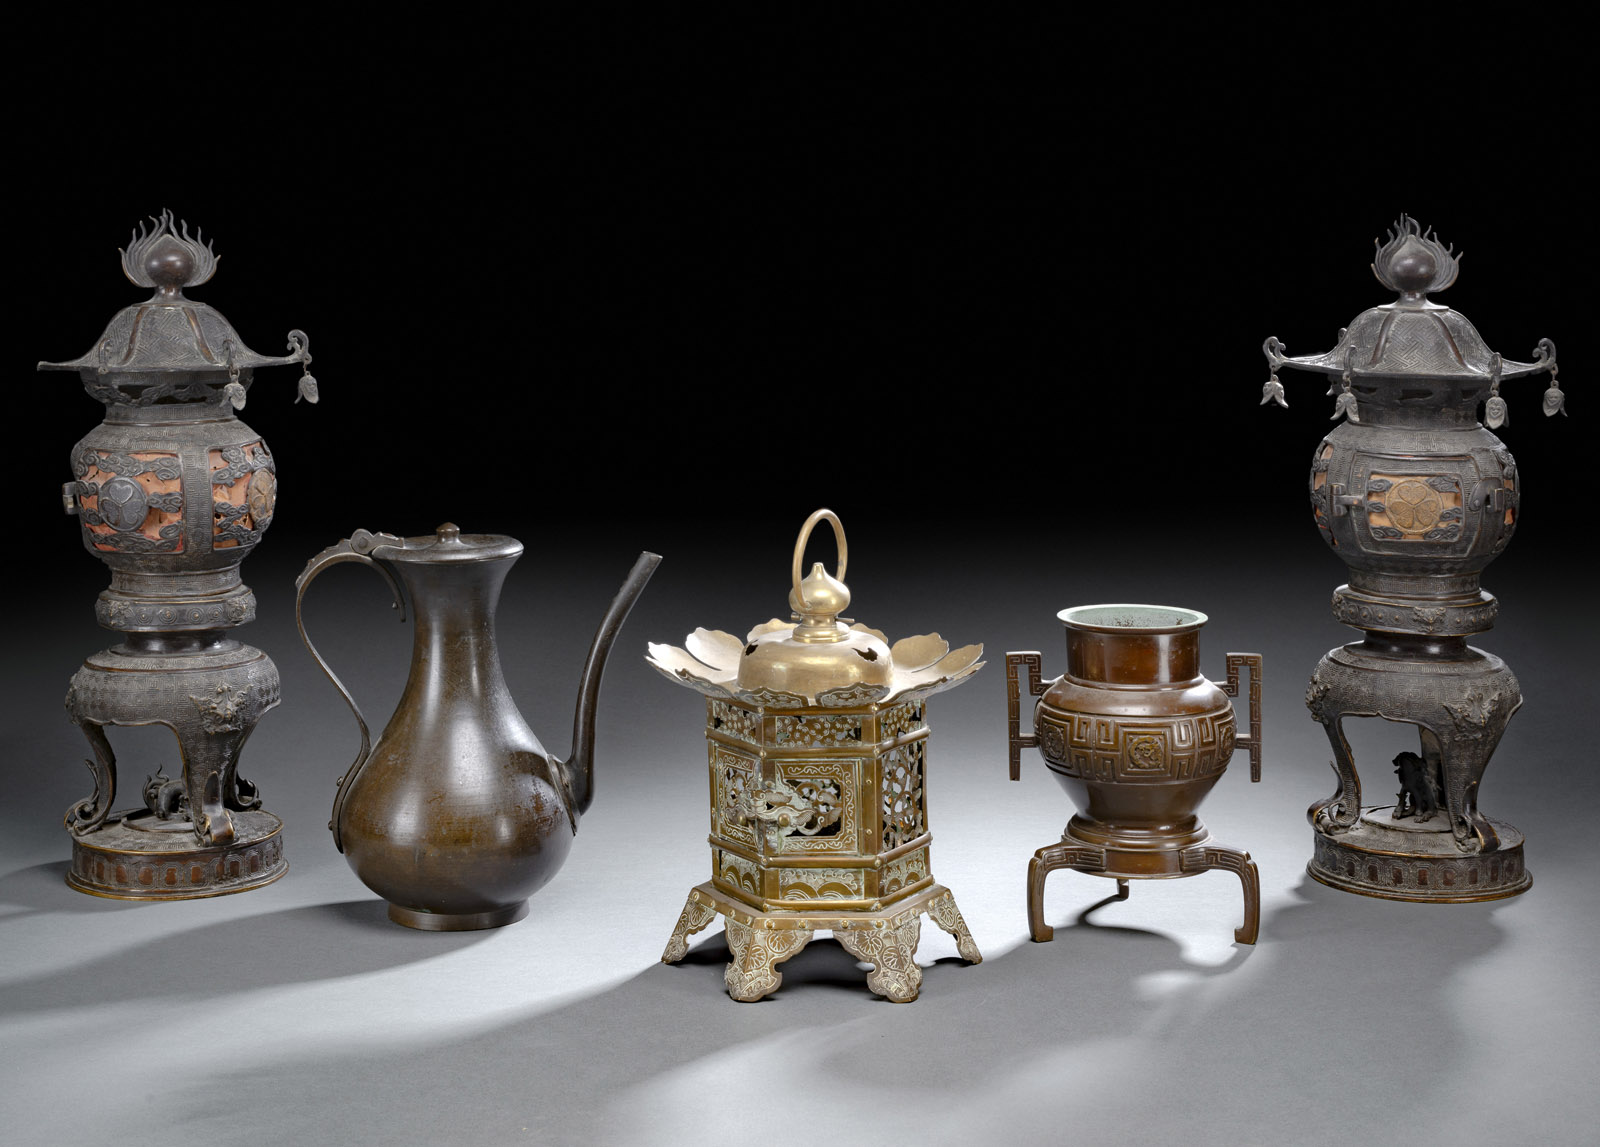 <b>A PAIR OF BRONZE LANTERNS AND OTHER BRONZE WORKS</b>